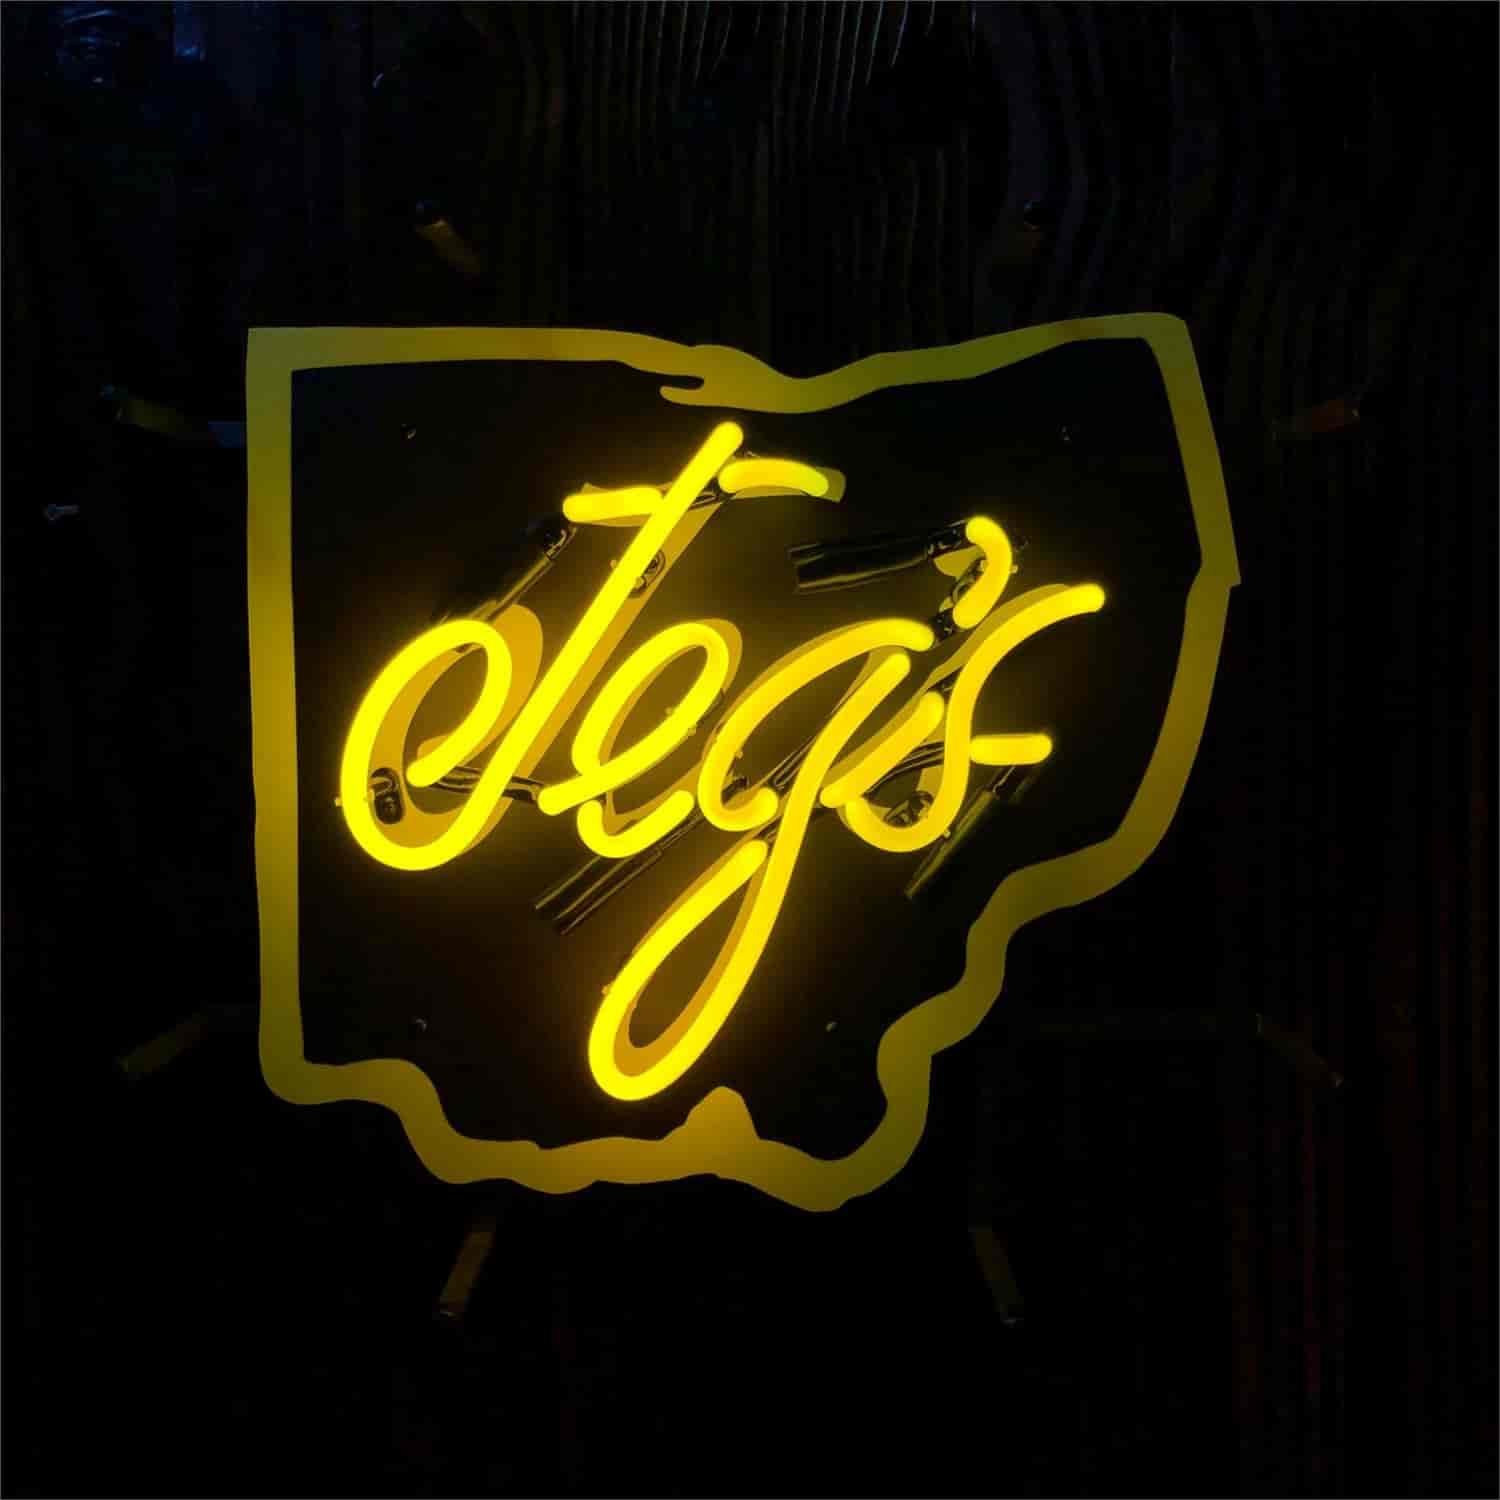 JEGS Ohio Logo Neon Sign - 18 in. x 16 in.